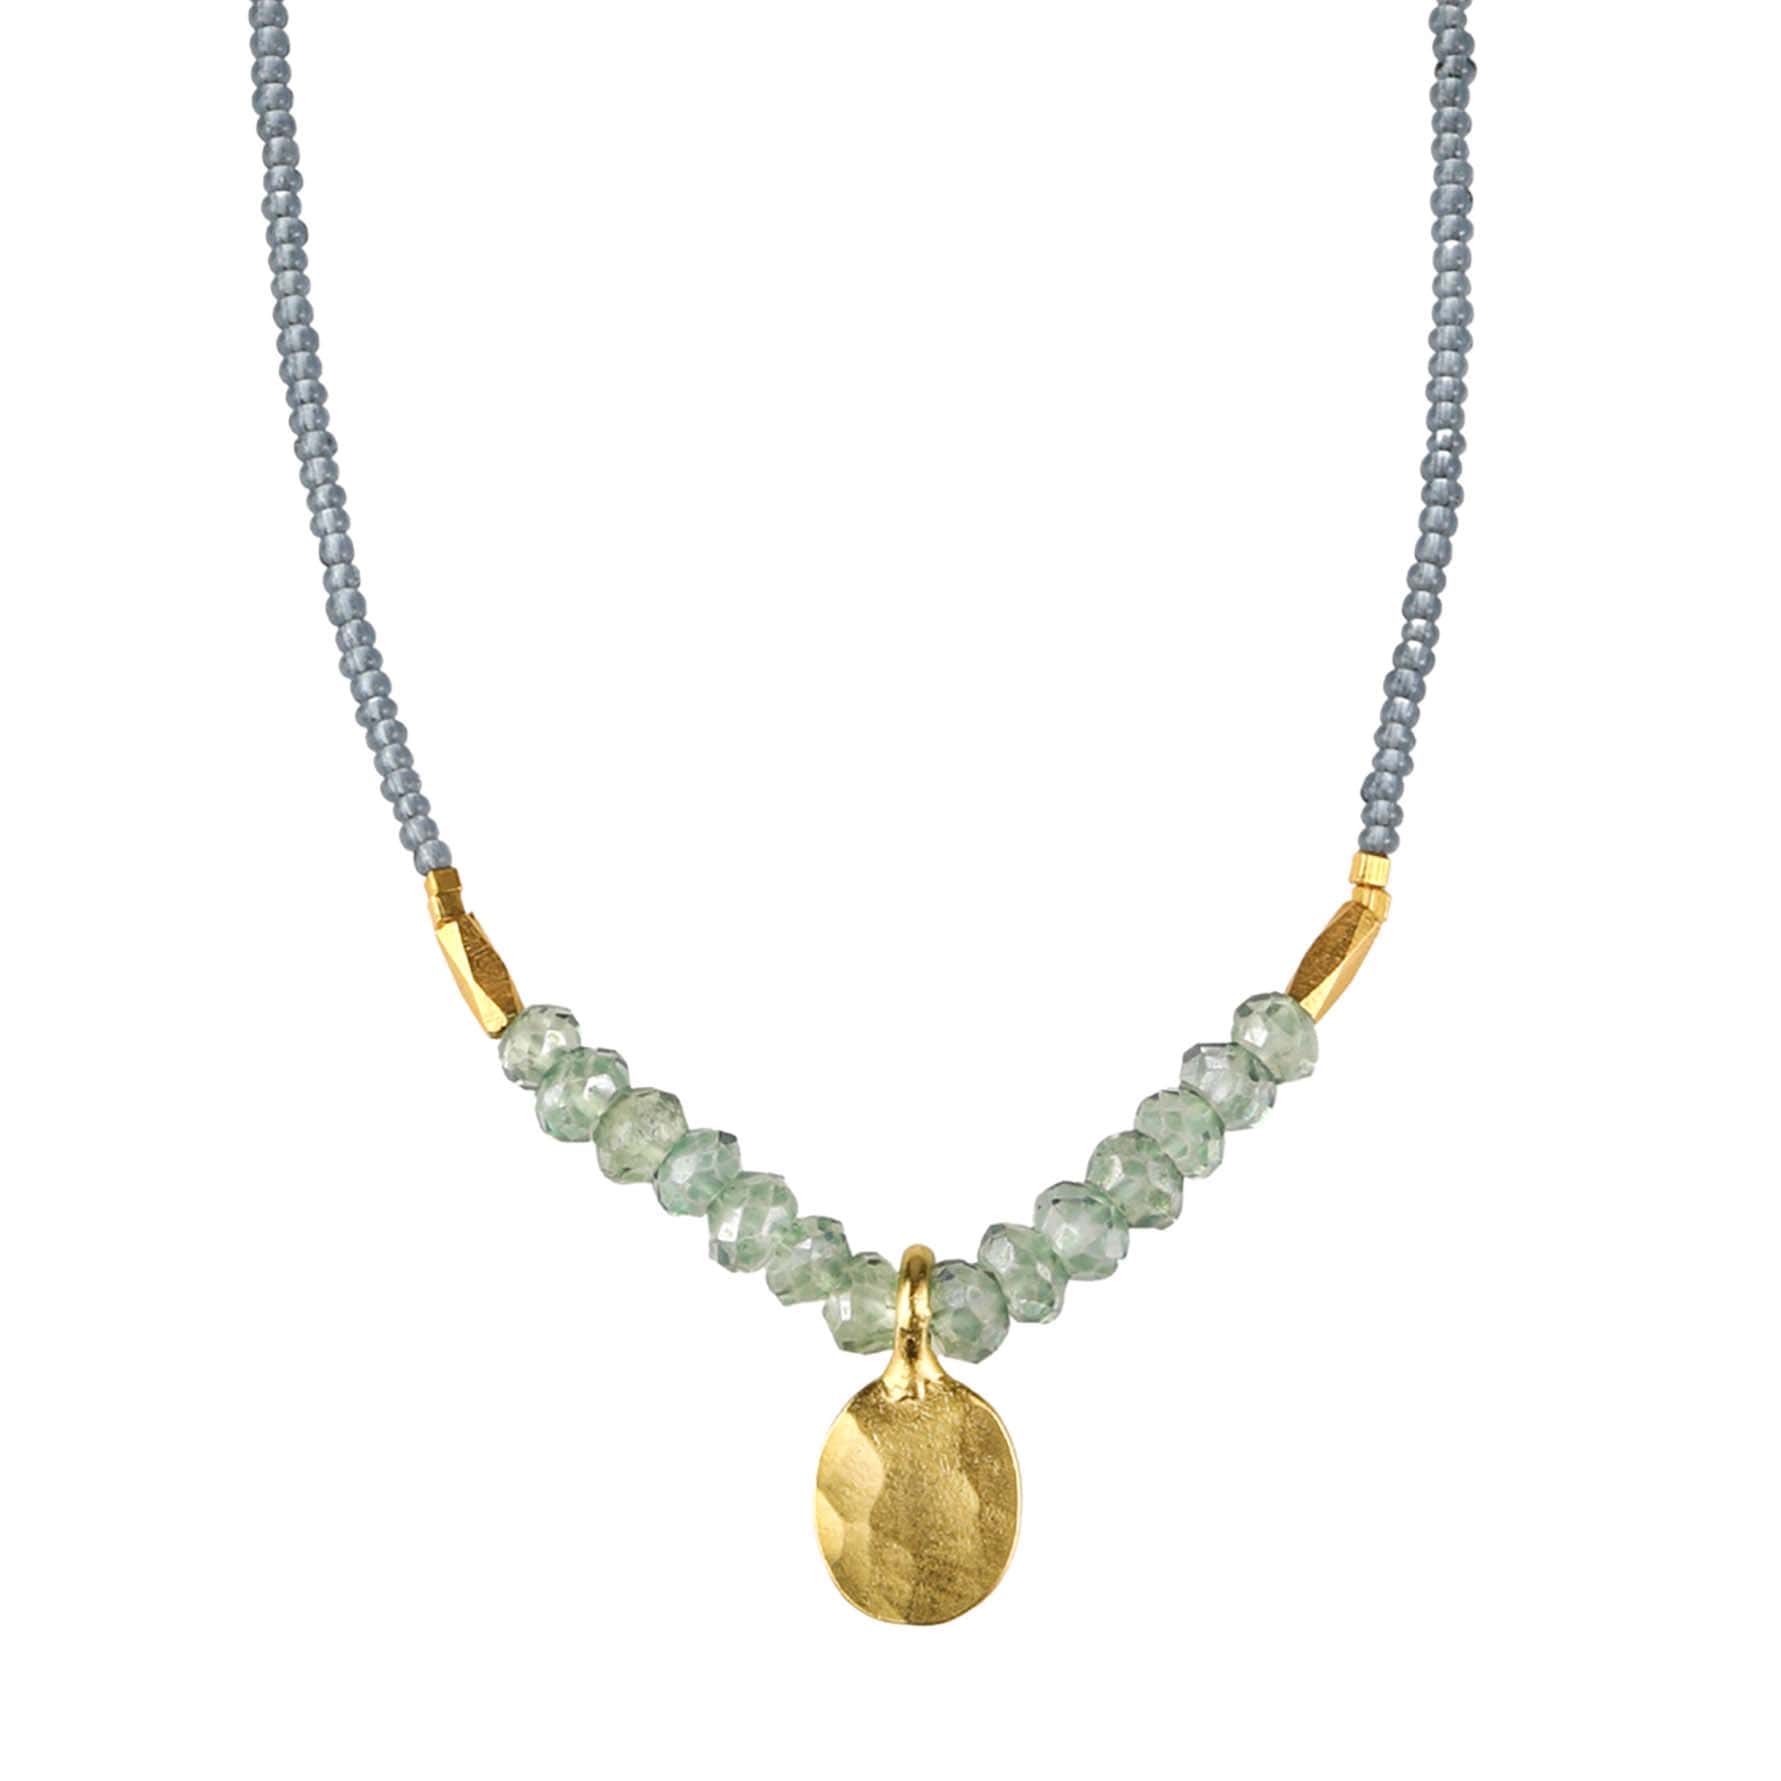 Debbie Fisher Grey Seed Bead Necklace with Hammered Gold Vermeil Pendant